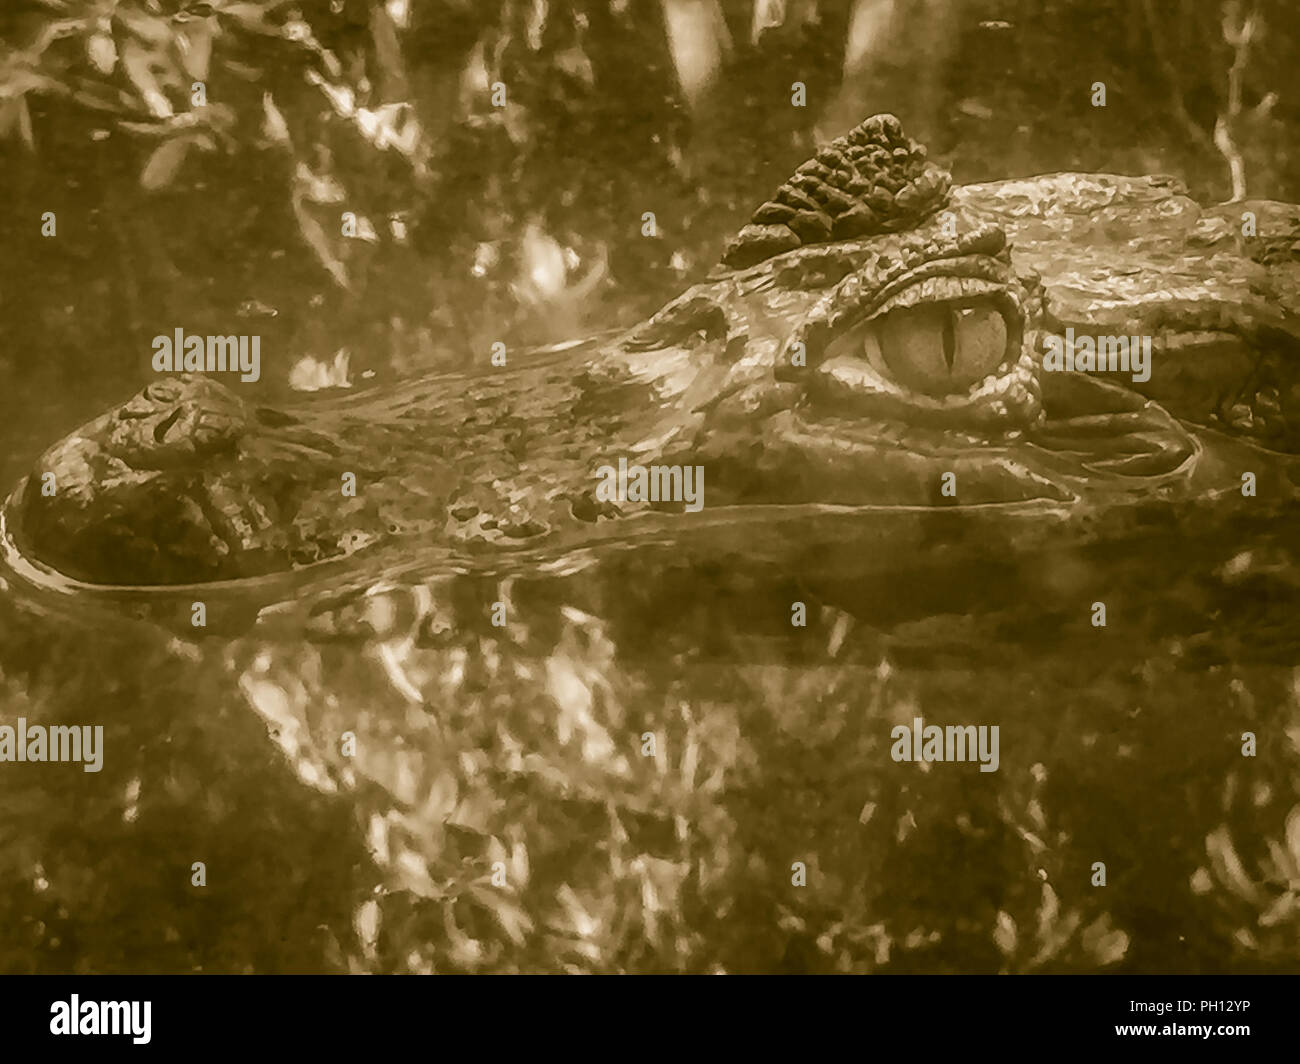 Close up to big and frightening eye of a Caiman (Caimaninae) crocodile staying in still water Stock Photo